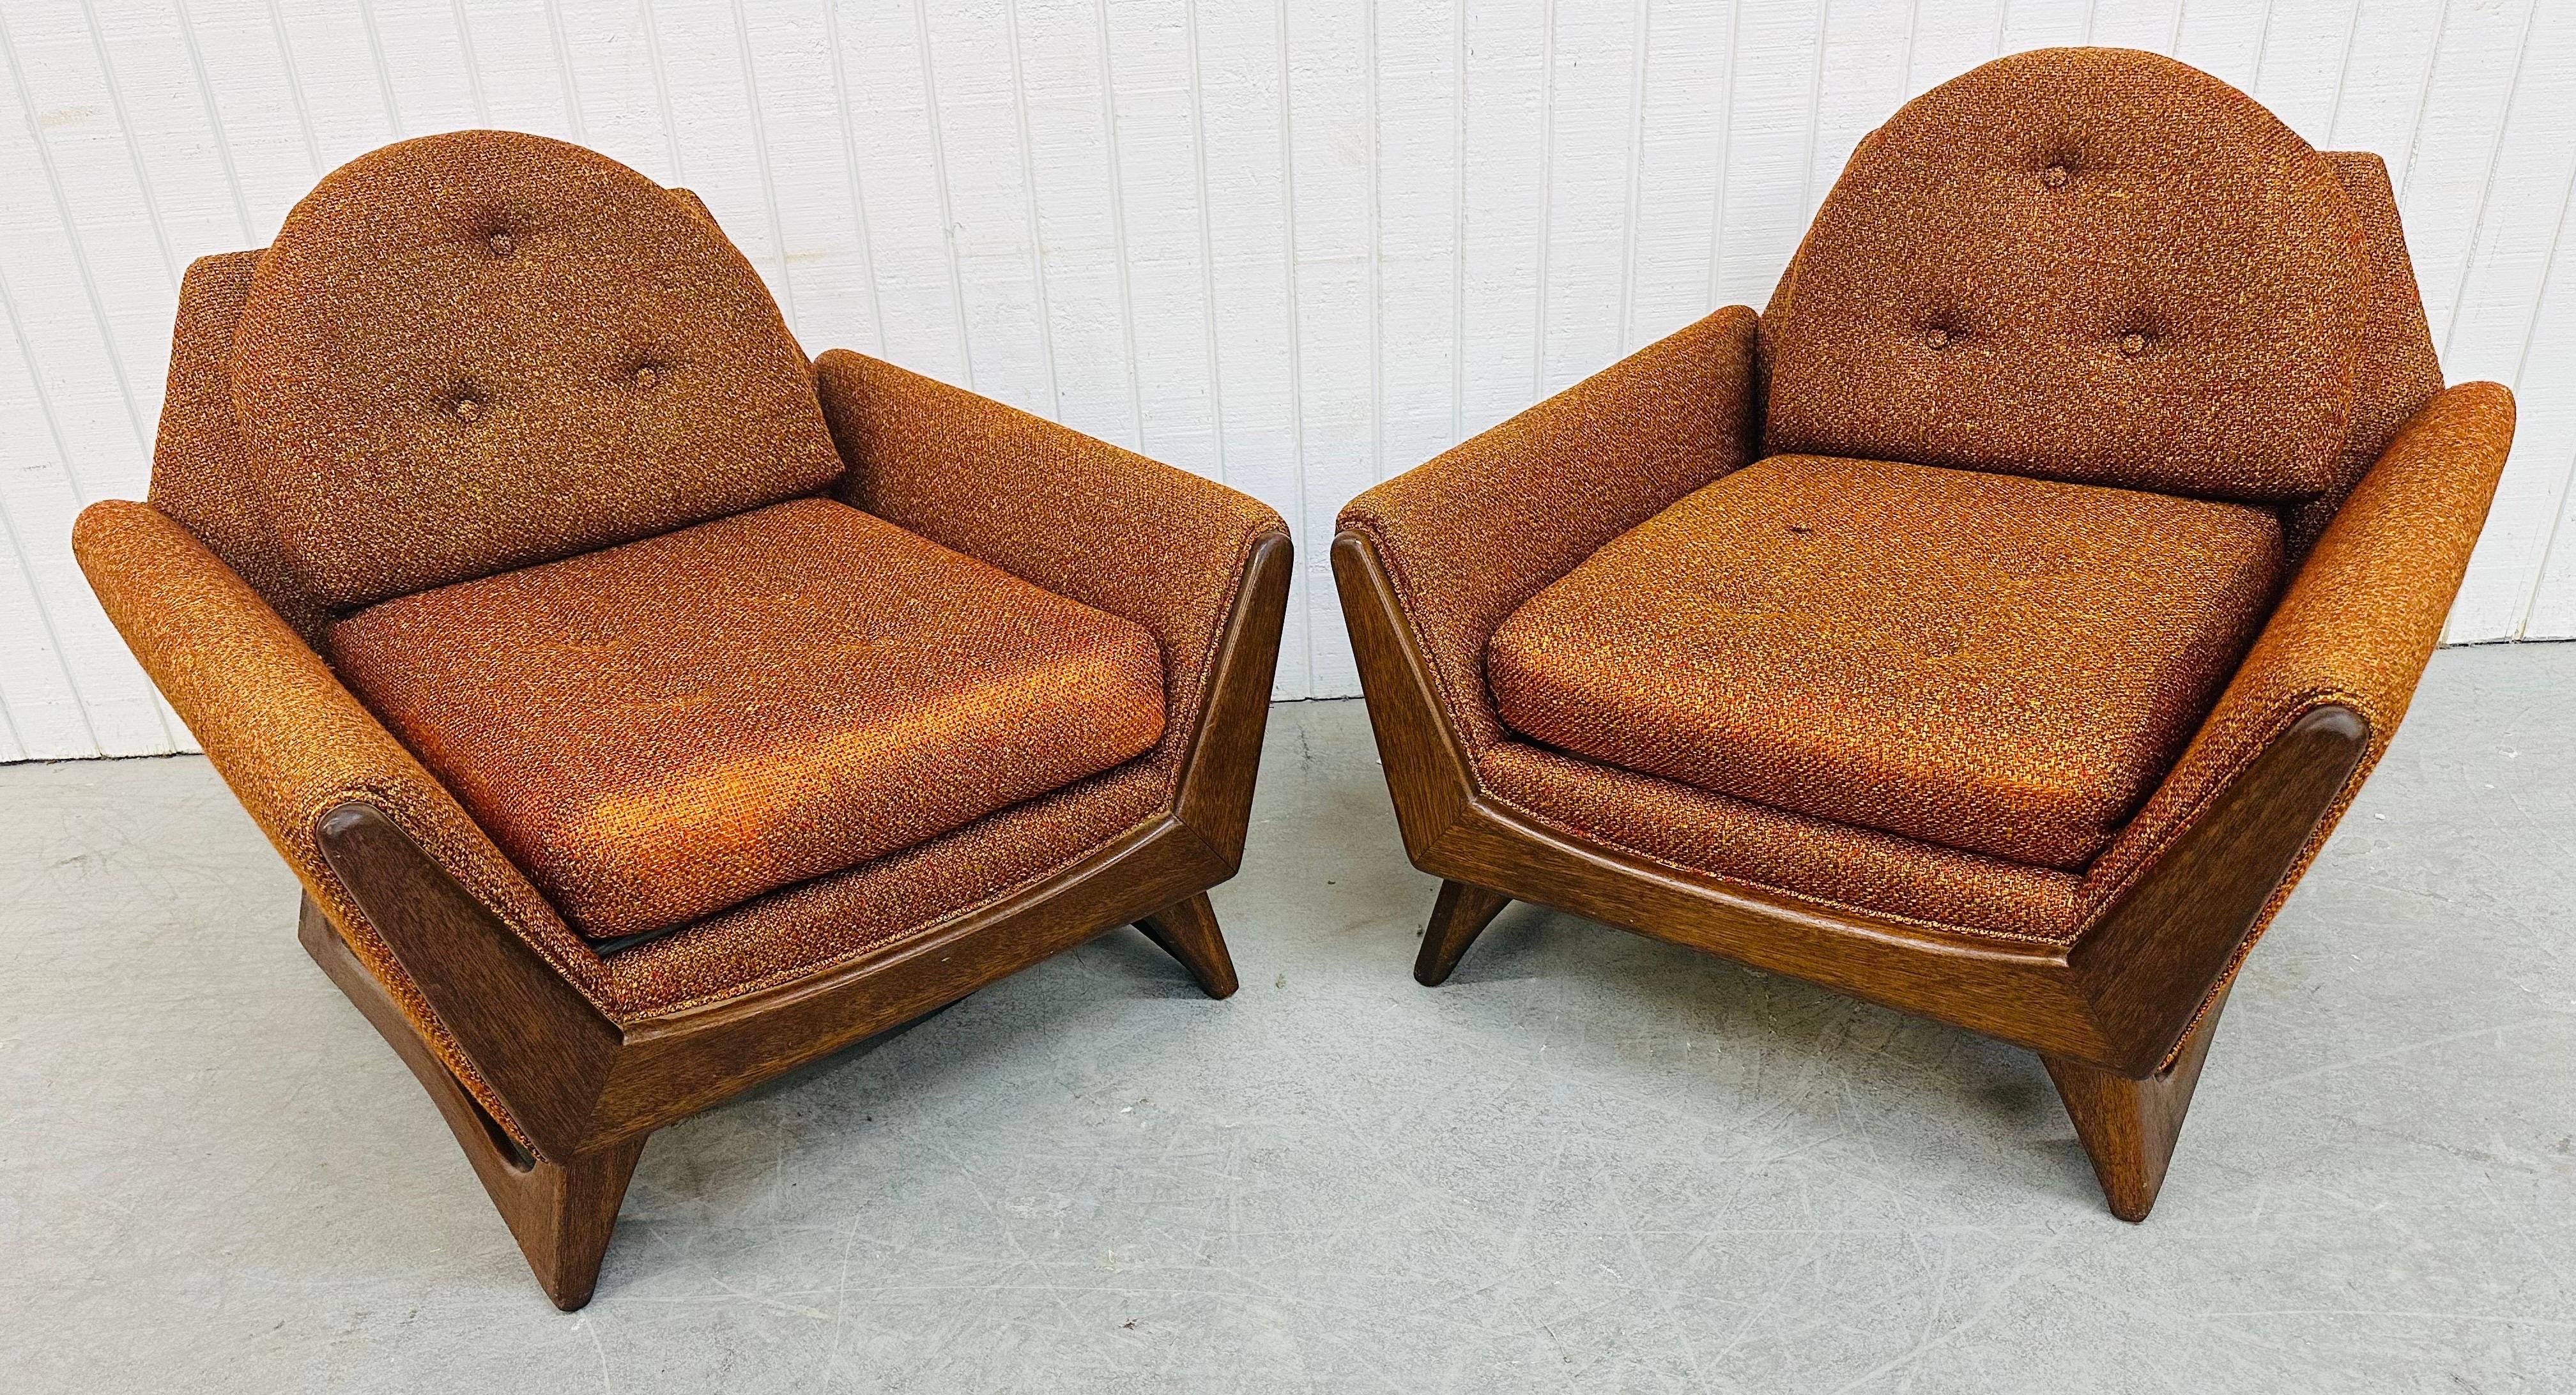 This listing is for a pair of Mid-Century Modern Adrian Pearsall Style Burnt Orange Walnut Arm Chairs. Featuring an Adrian Pearsall style design, original burnt orange upholstery, removal cushions, and angular walnut legs. This is an exceptional